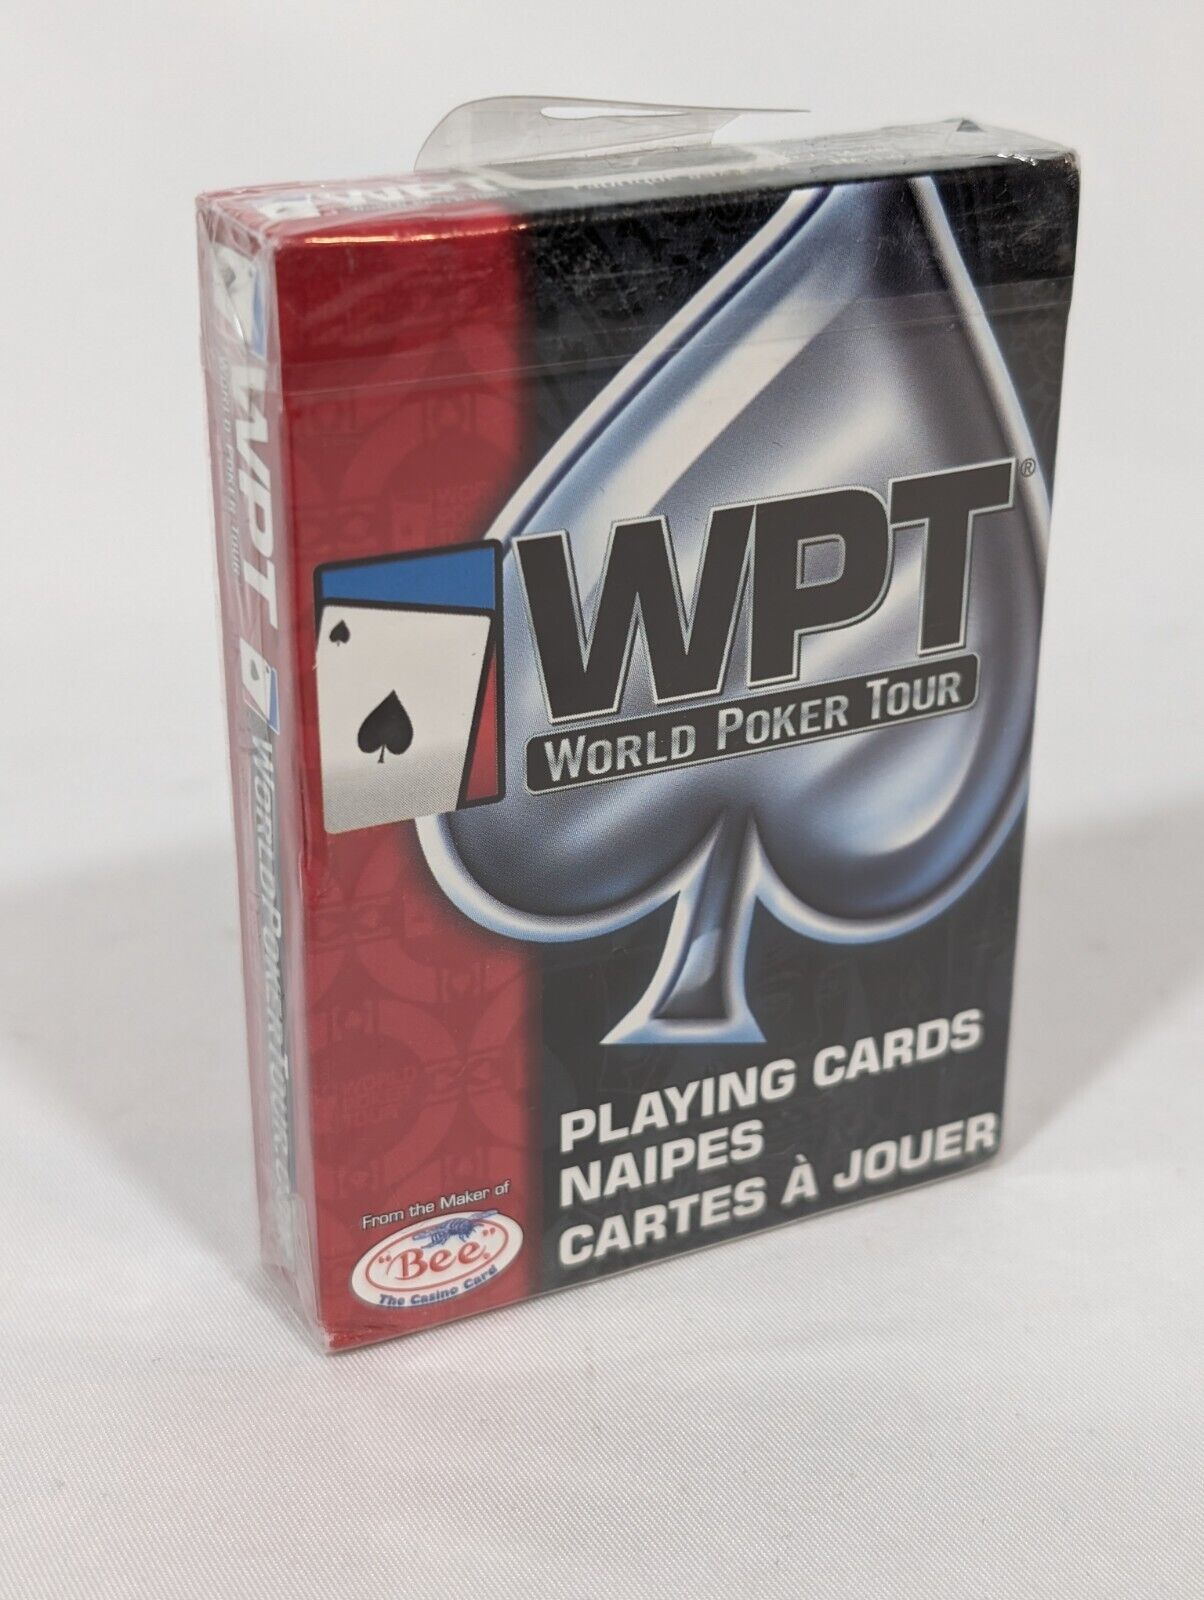 Bee - World Poker Tour WPT Playing Cards - Red - Sealed